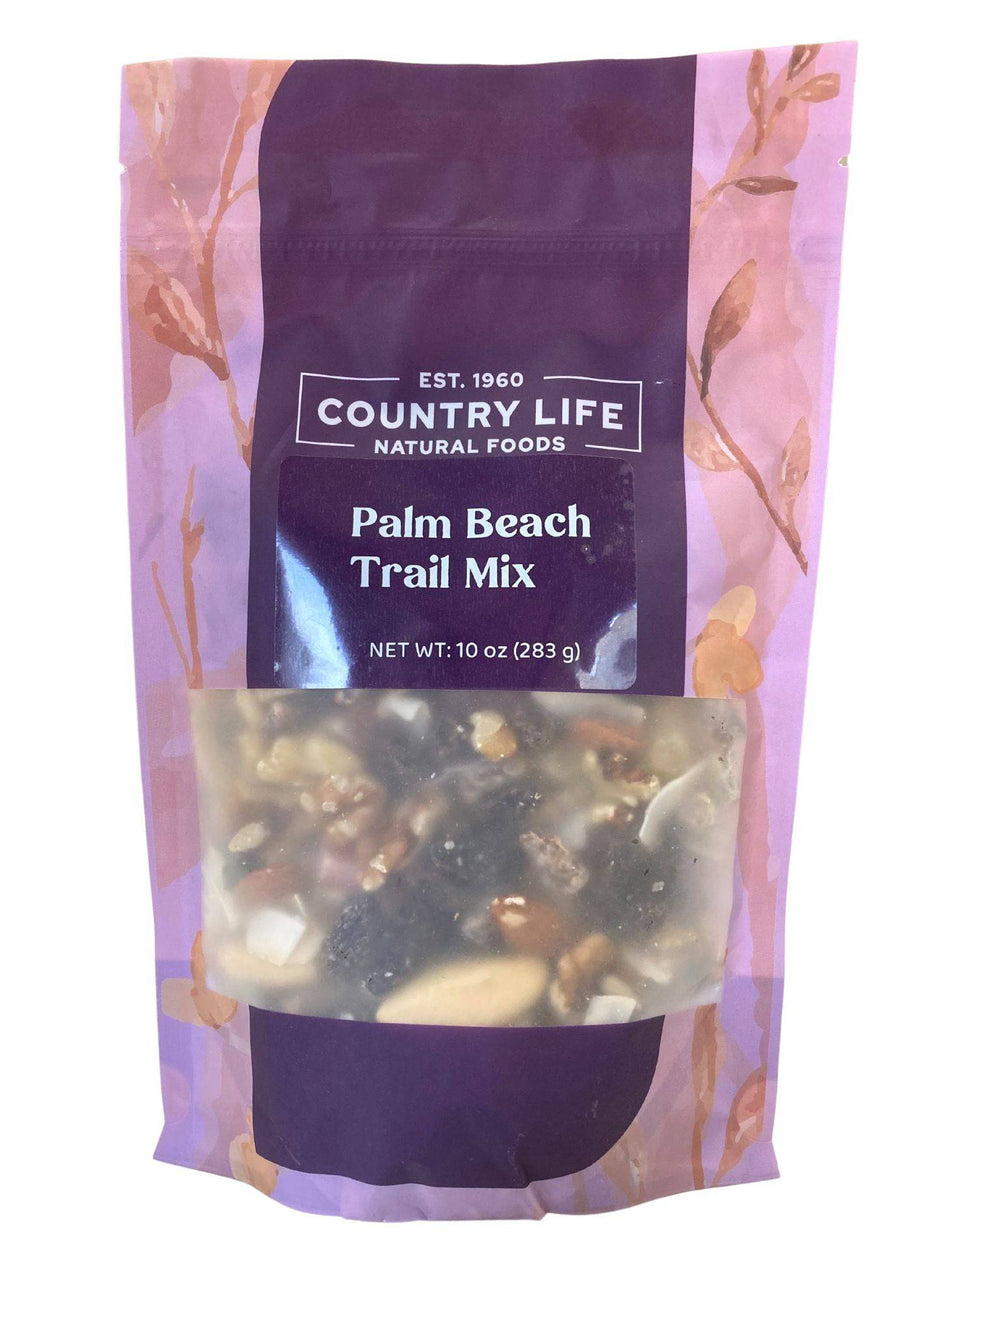 Palm Beach Trail Mix - Country Life Natural Foods